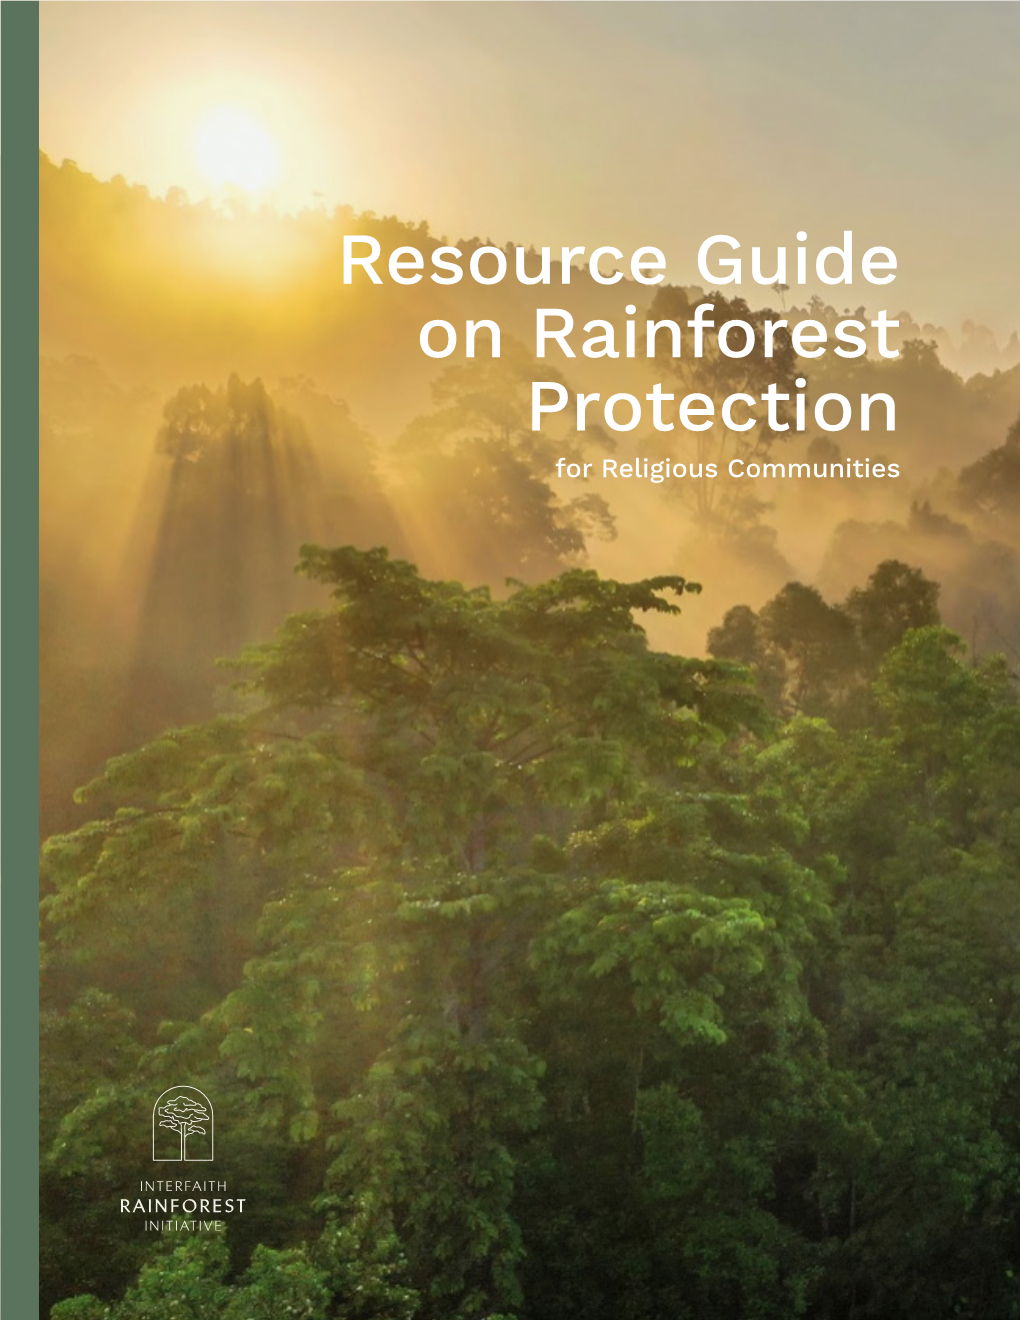 Resource Guide on Rainforest Protection for Religious Communities